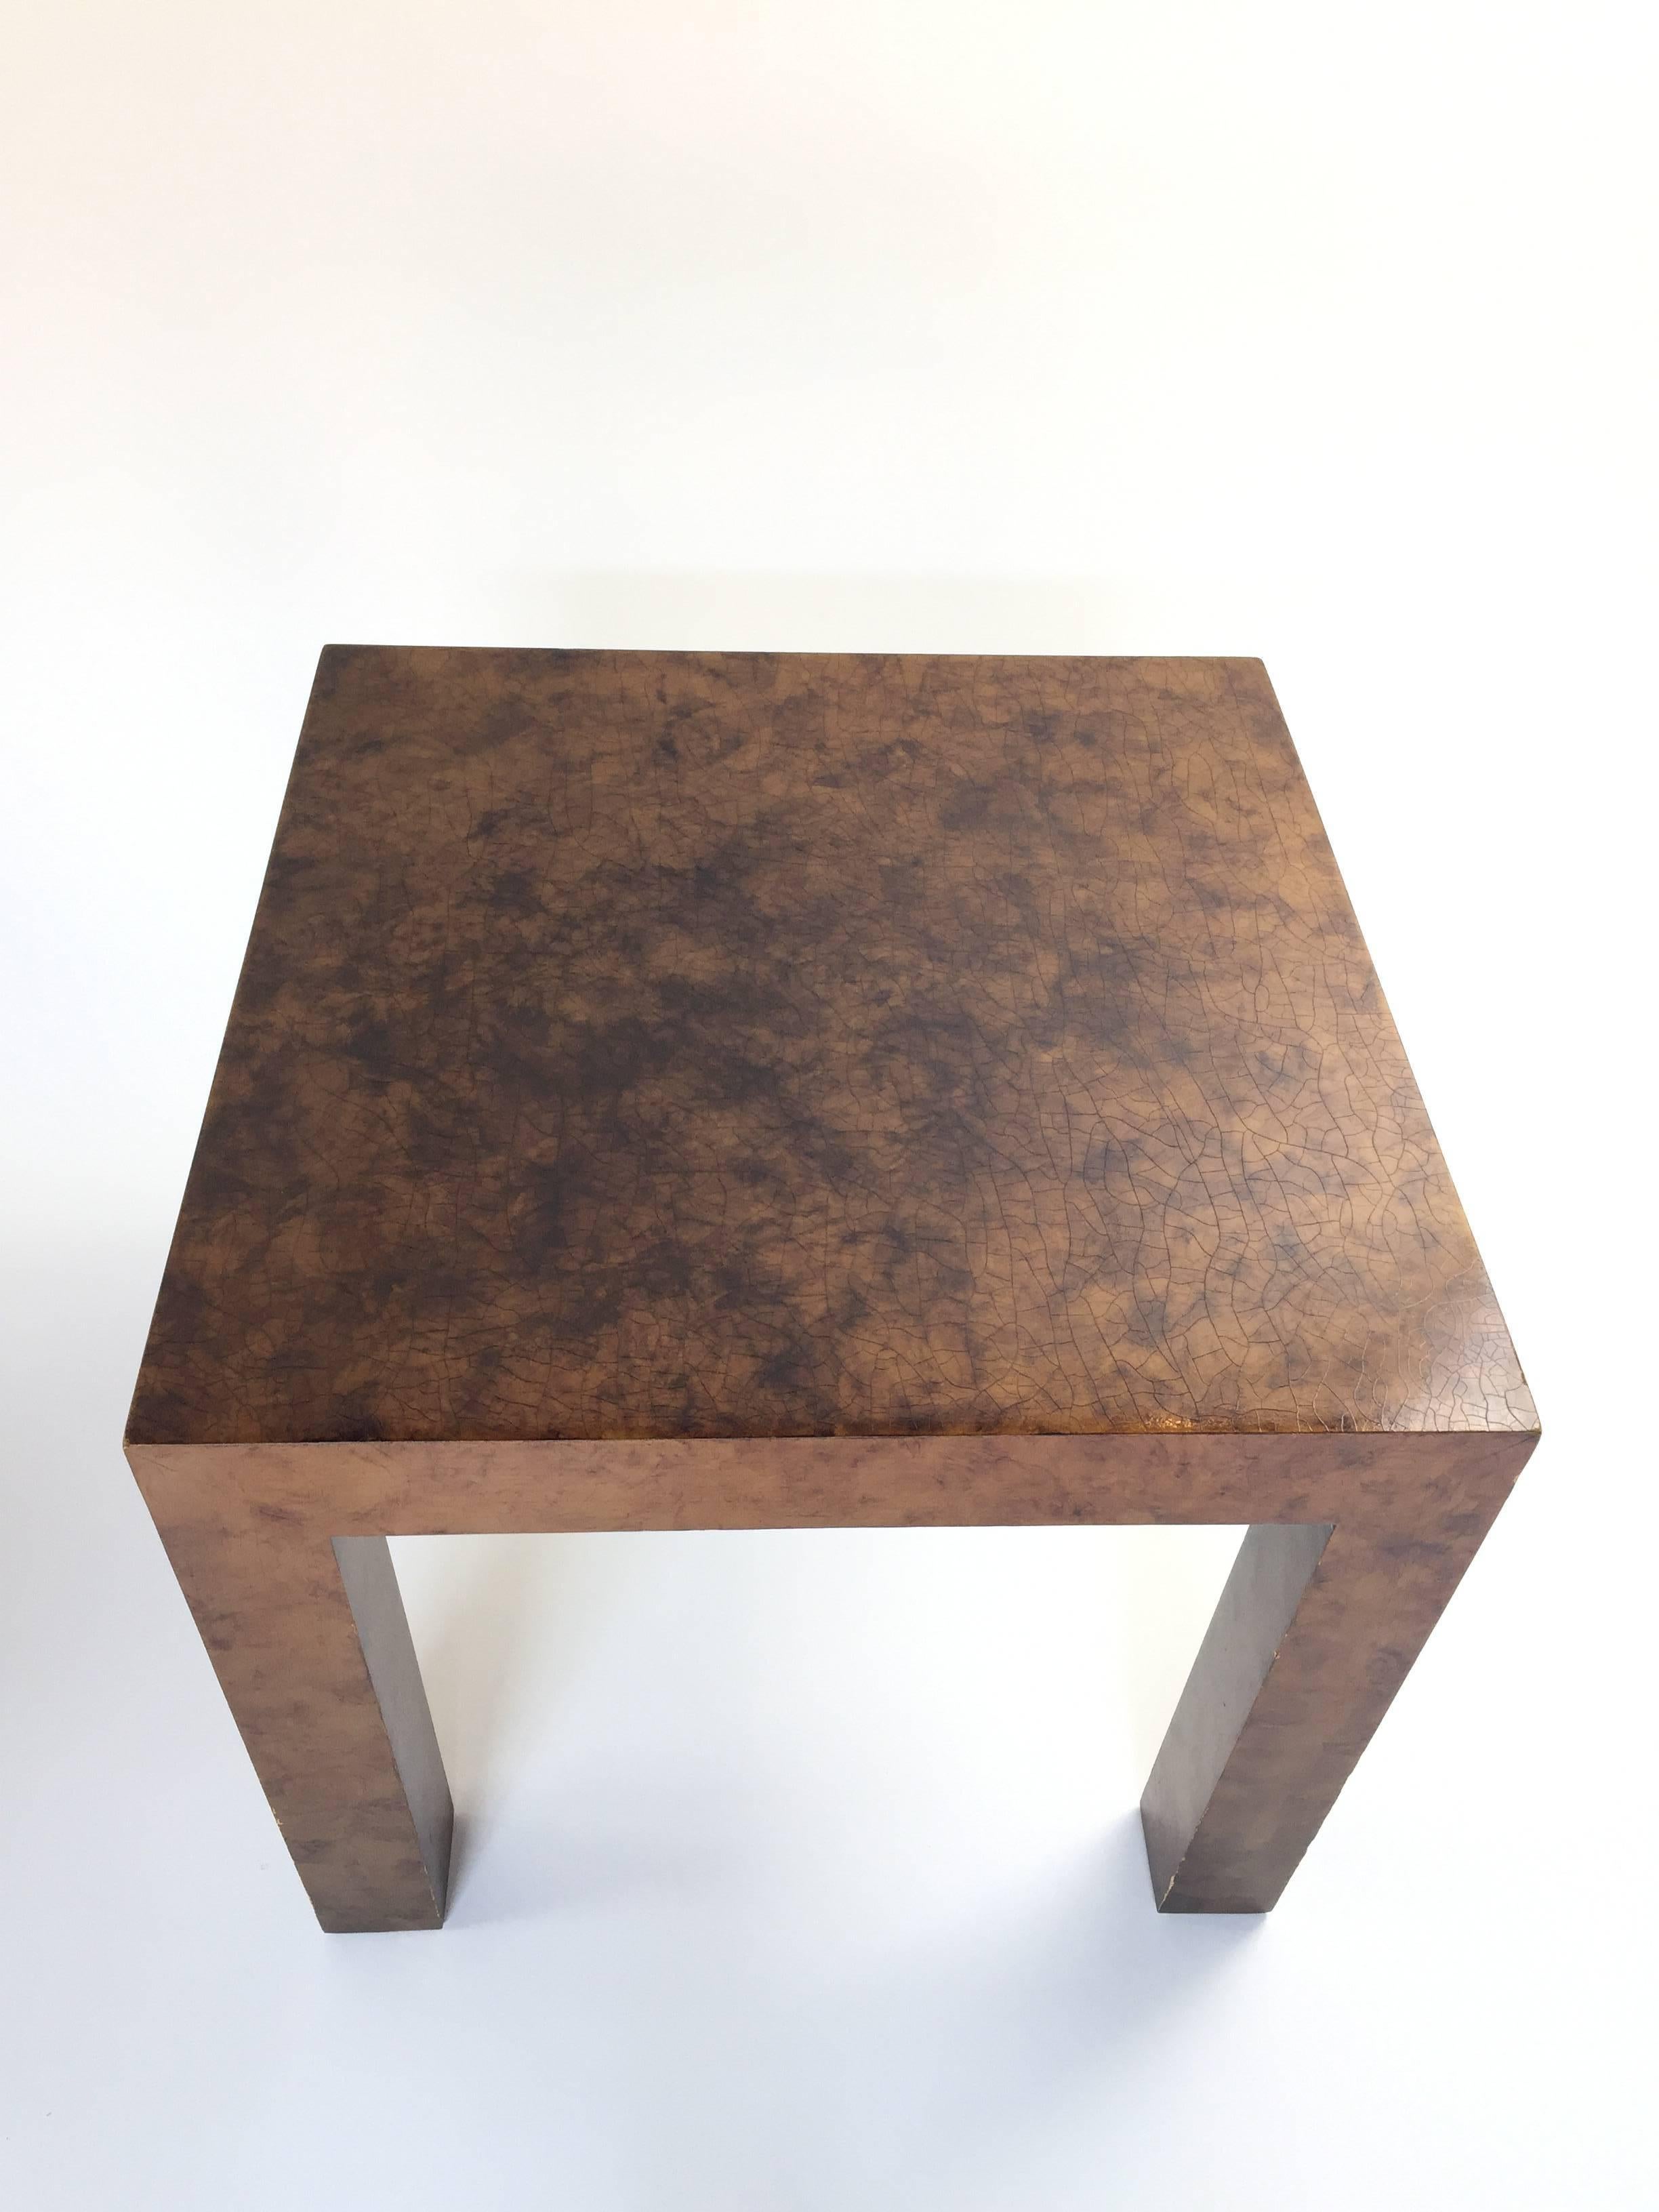 Set of three crackle-top finish burl wood side tables by Milo Baughman for Thayer Coggin.